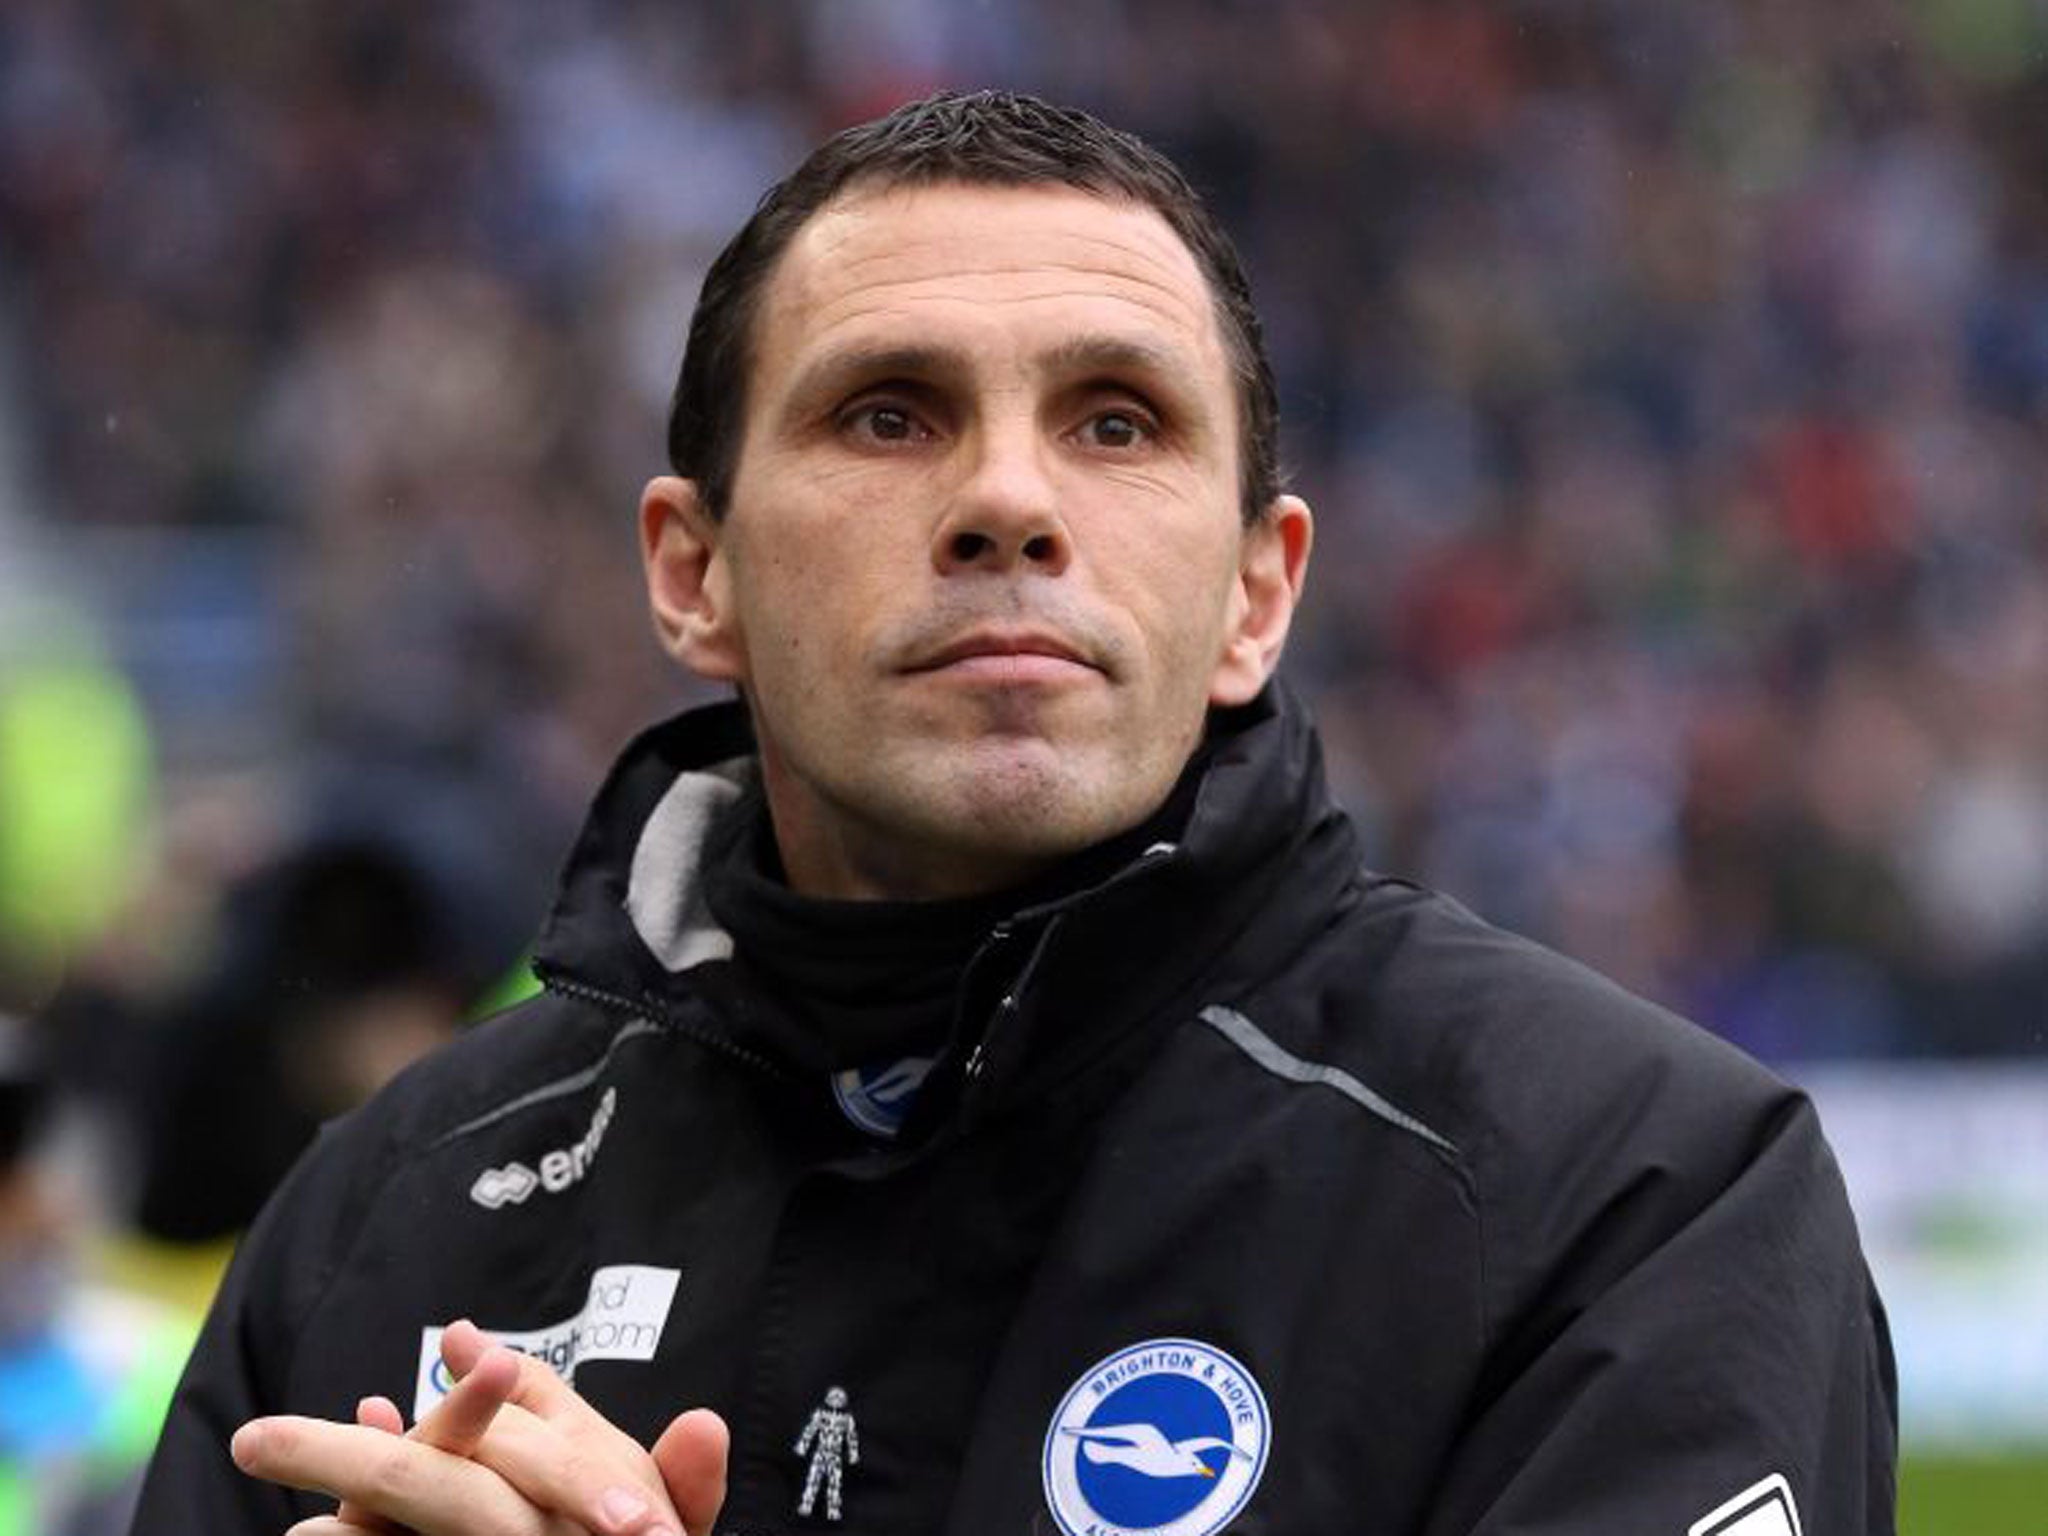 Gustavo Poyet: Was dramatically suspended by Brighton for alleged breaches of contract